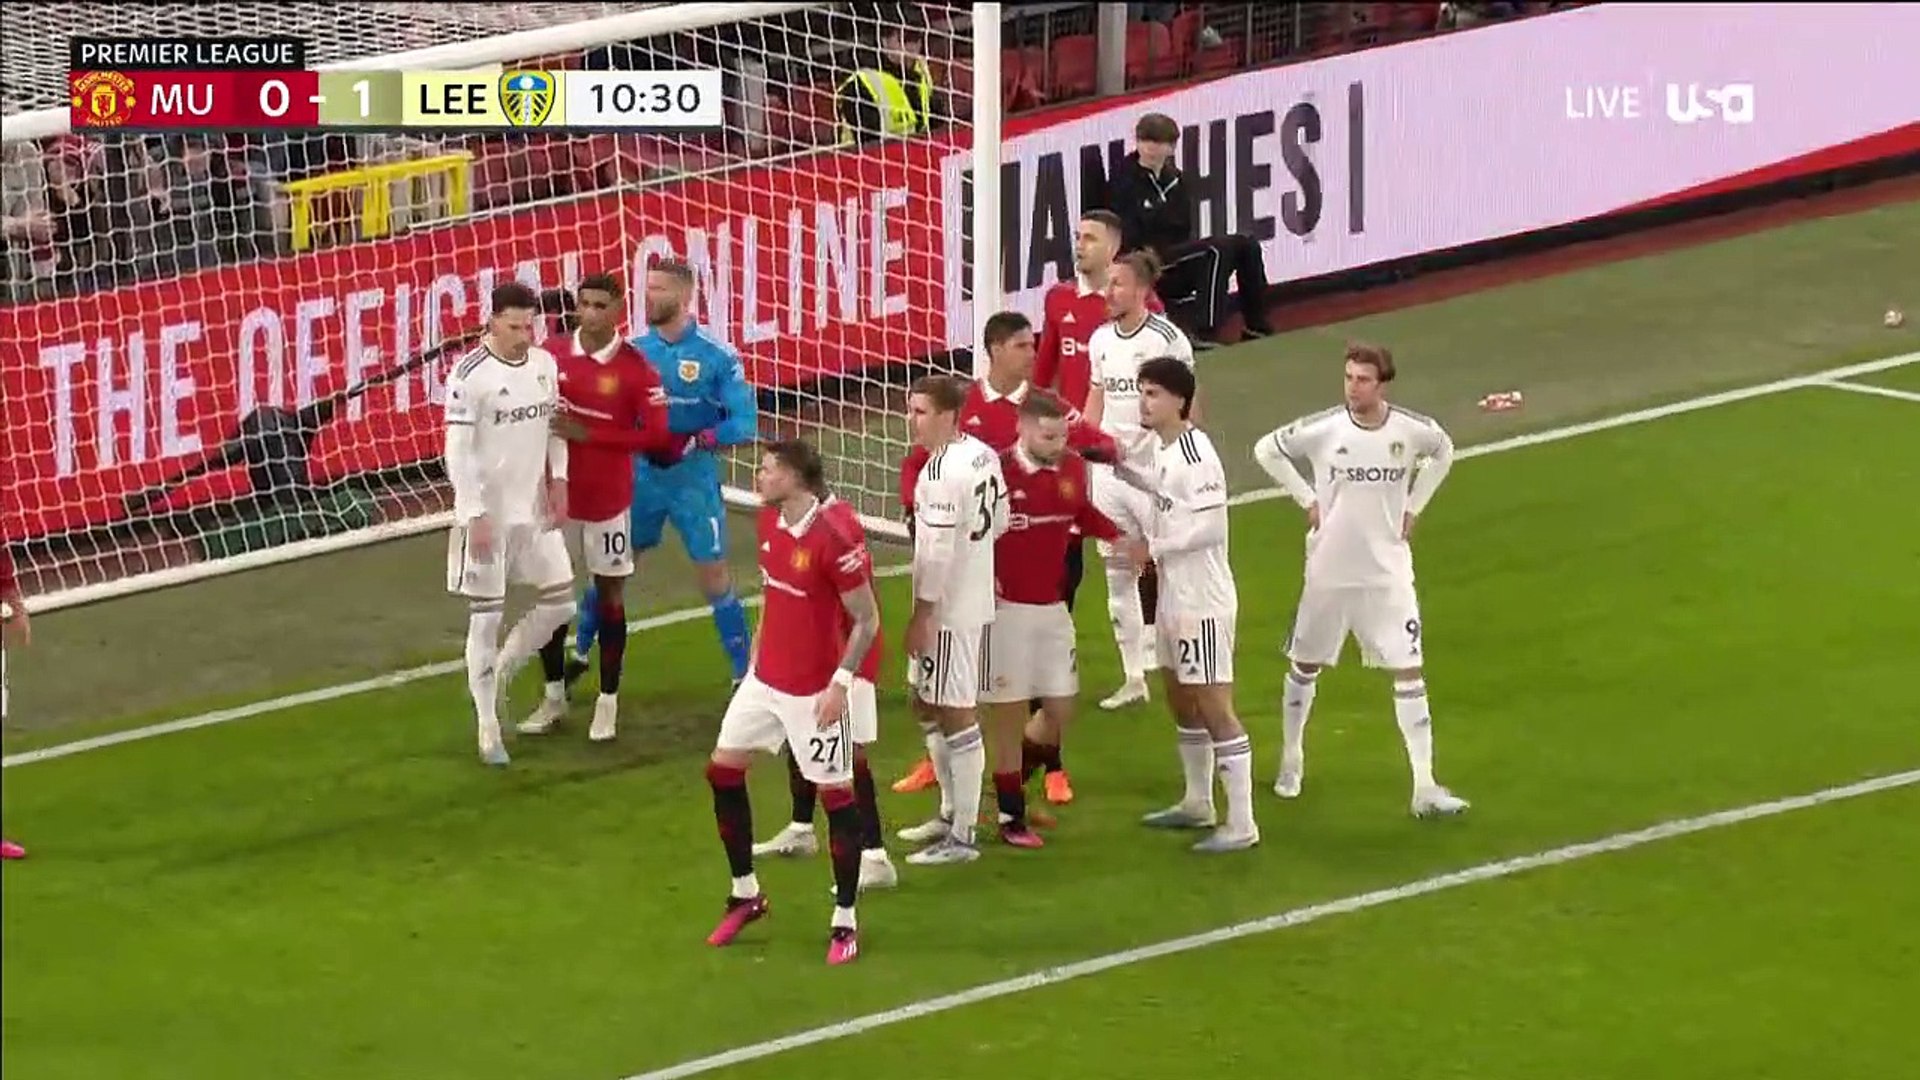 Manchester United vs Leeds United 2-2 Very Extended Highlights and All Goals Result (HQ)